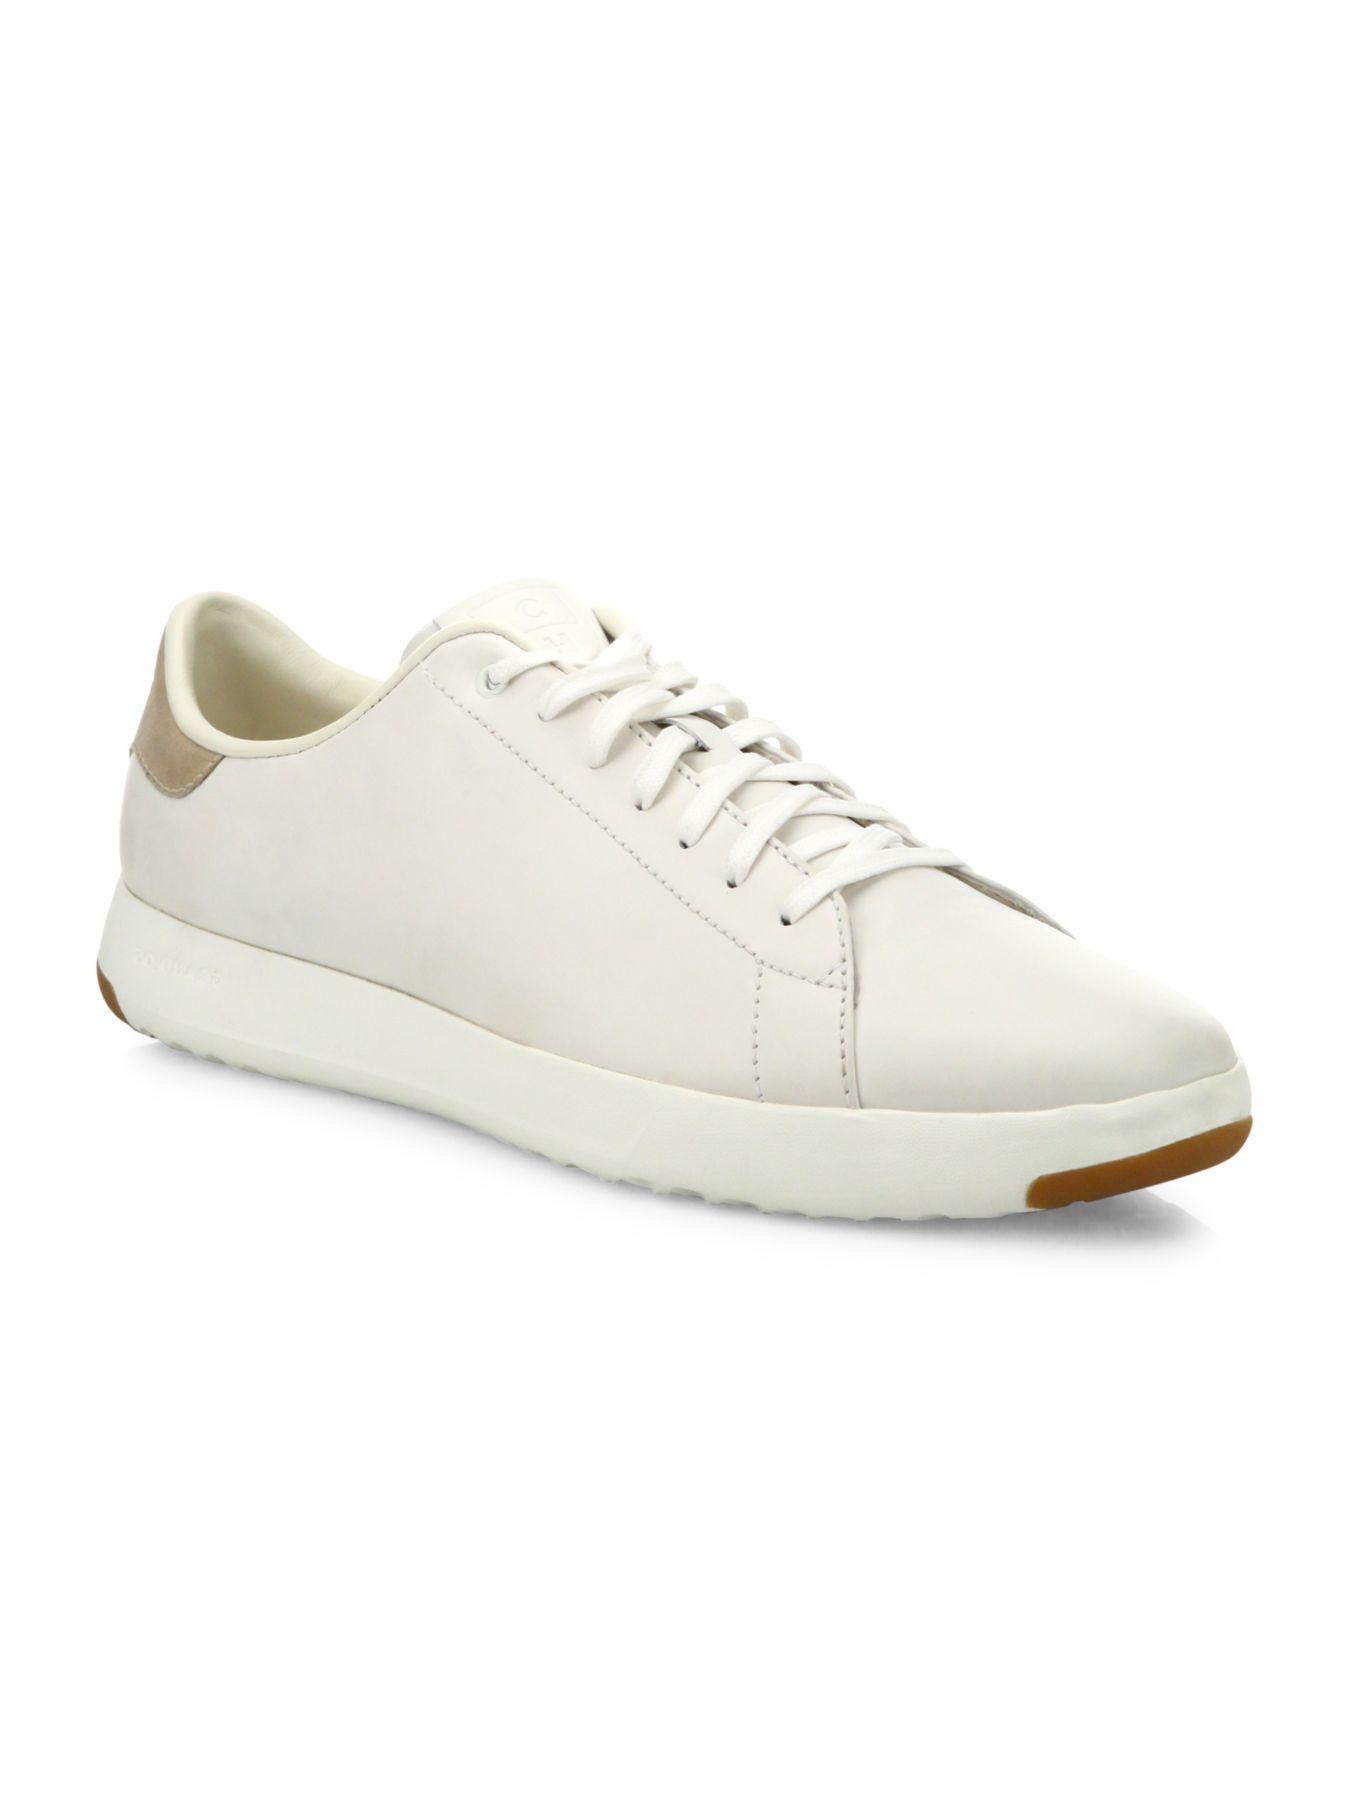 Cole Haan Grandpro Tennis Leather Sneakers in White for Men - Lyst